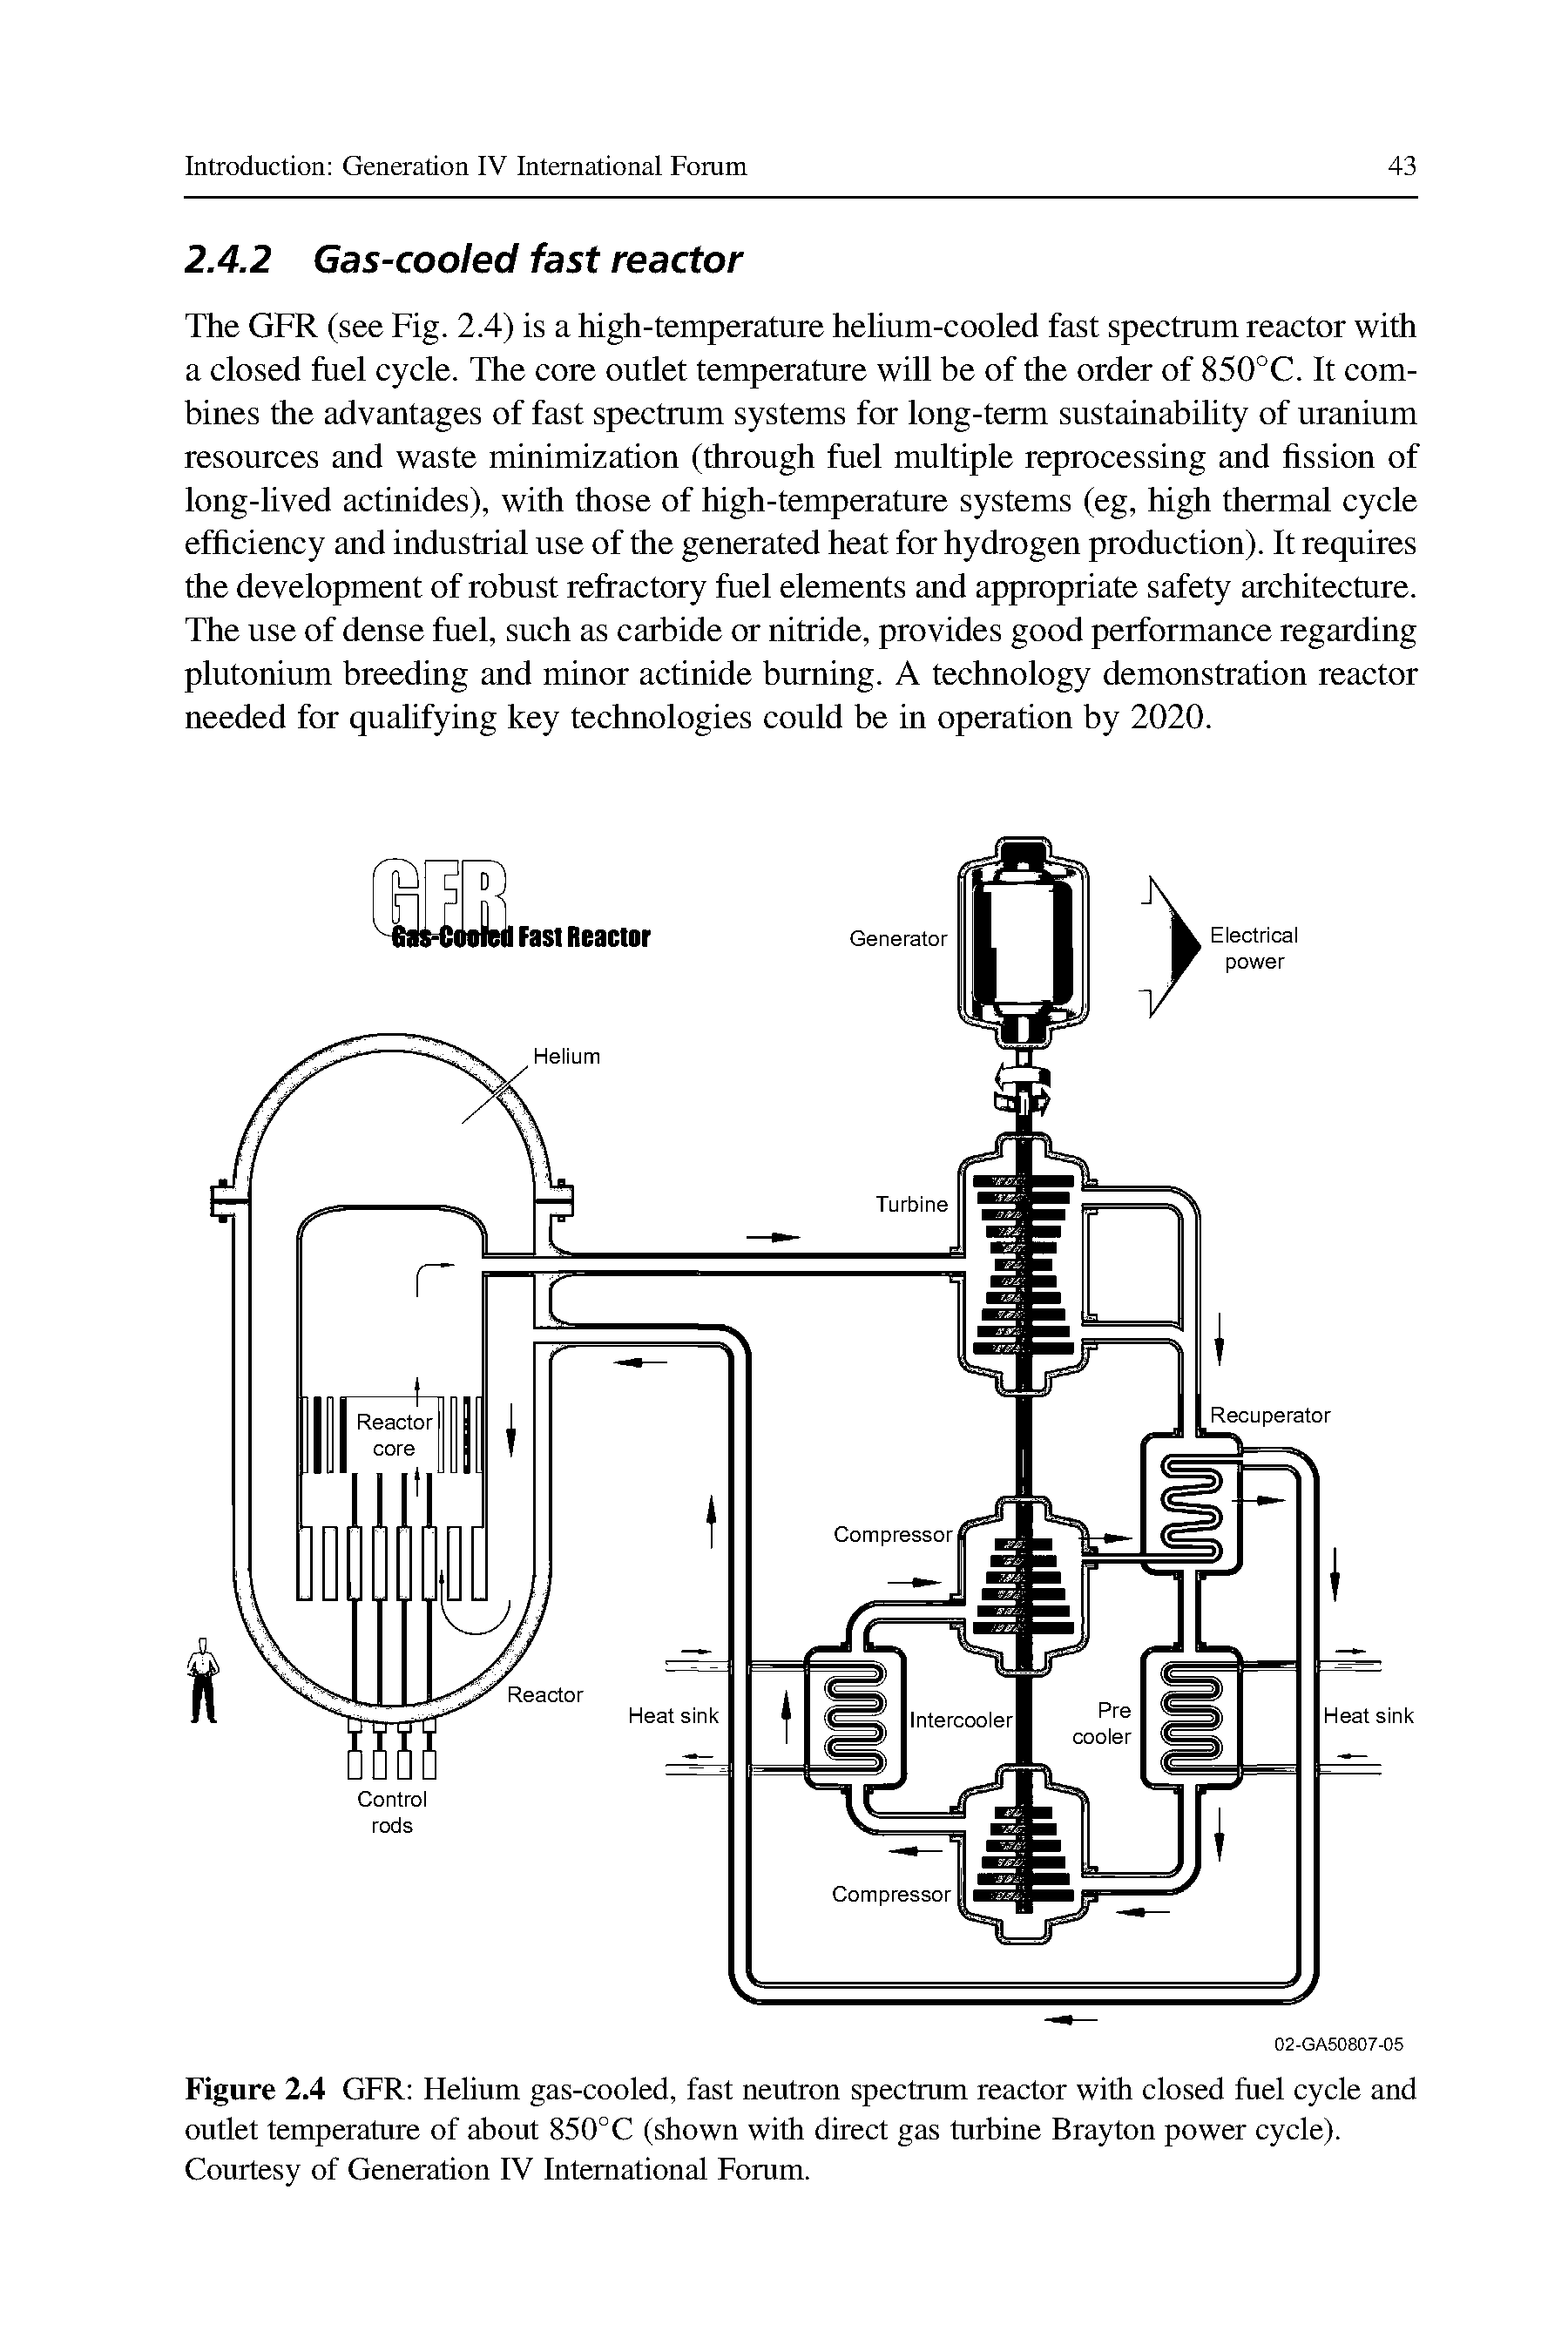 Figure 2.4 GFR Helium gas-cooled, fast neutron spectrum reactor with closed fuel cycle and outlet temperature of about 850°C (shown with direct gas turbine Brayton power cycle). Courtesy of Generation IV International Forum.